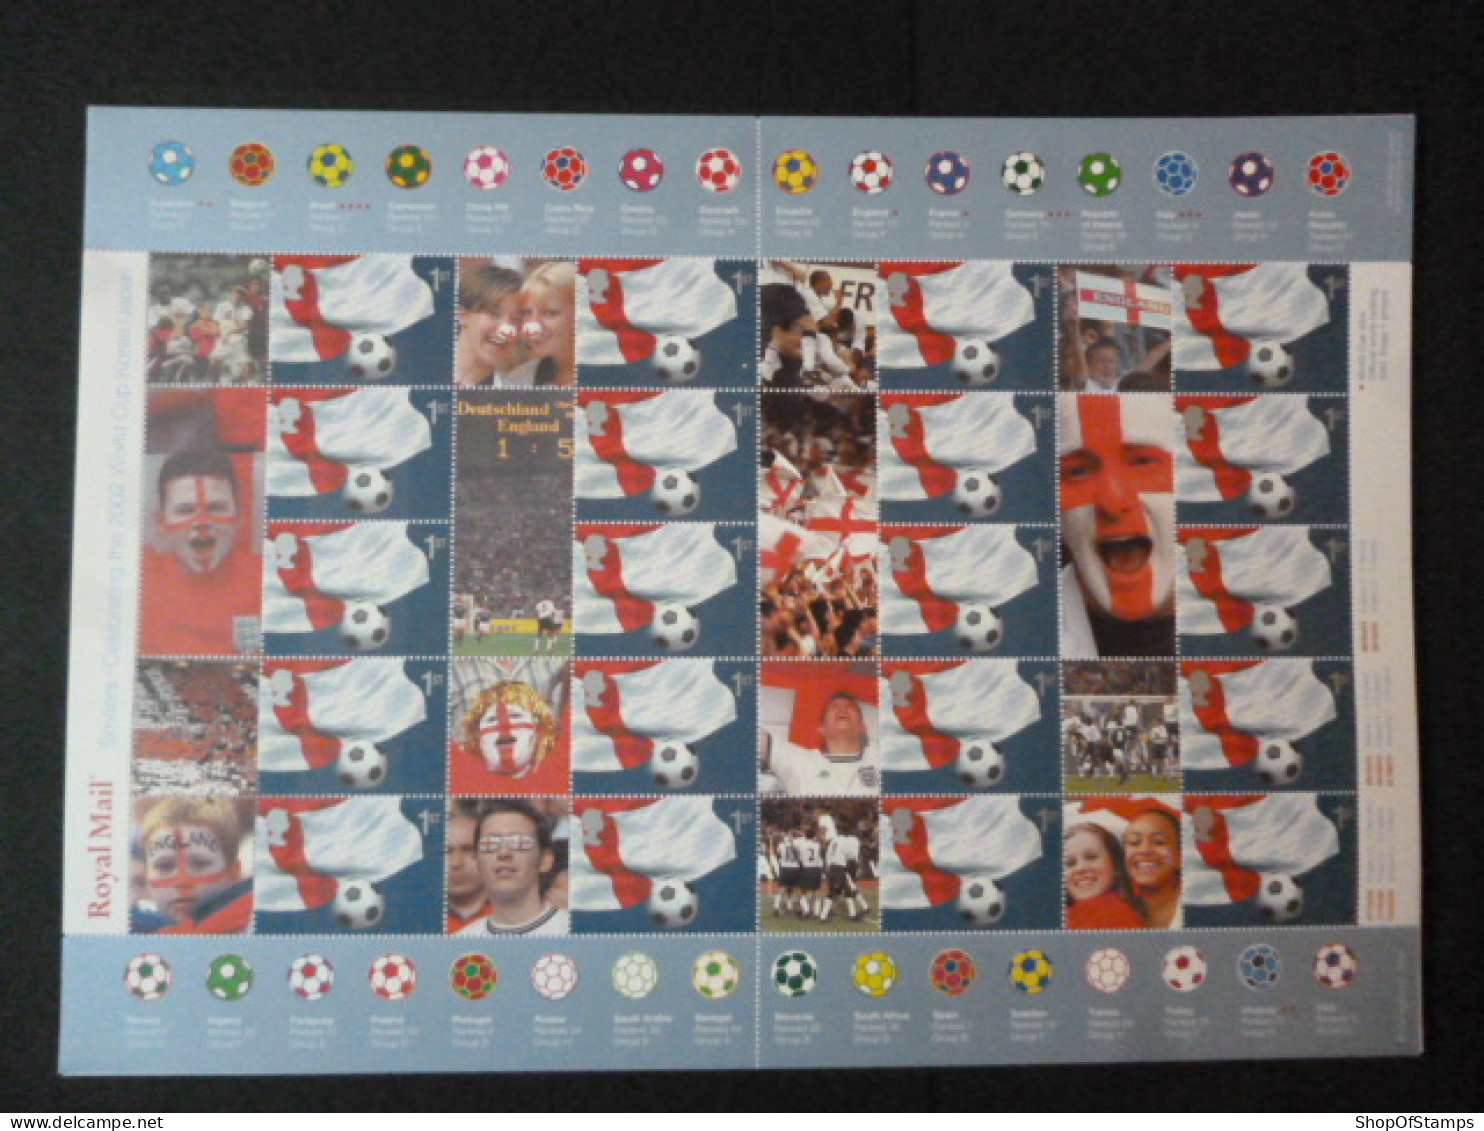 GREAT BRITAIN SG 2294 20 STAMPS SMILER SHEET WITH GUTTERS & LABELS - Feuilles, Planches  Et Multiples